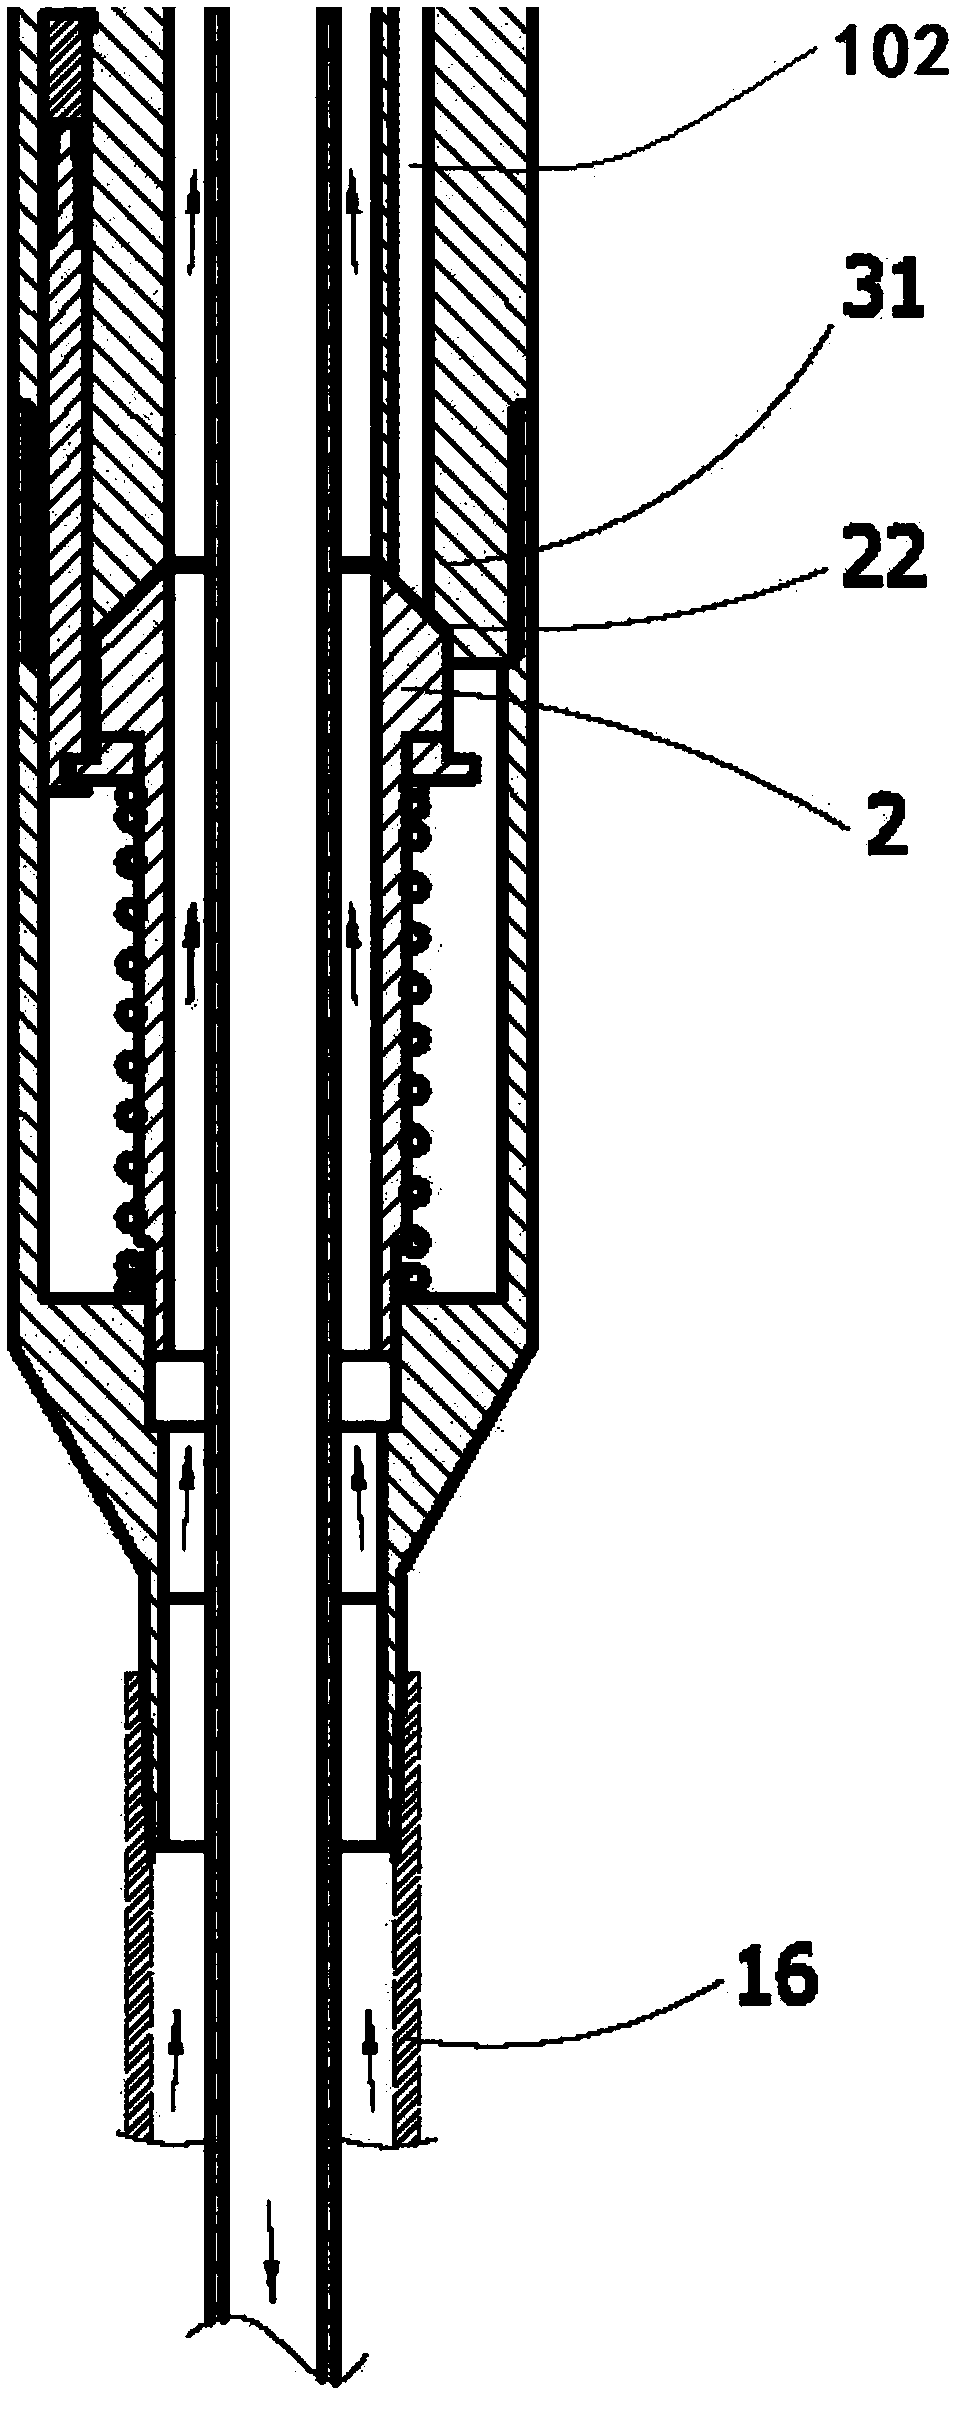 Annular valve plate type downhole safety device